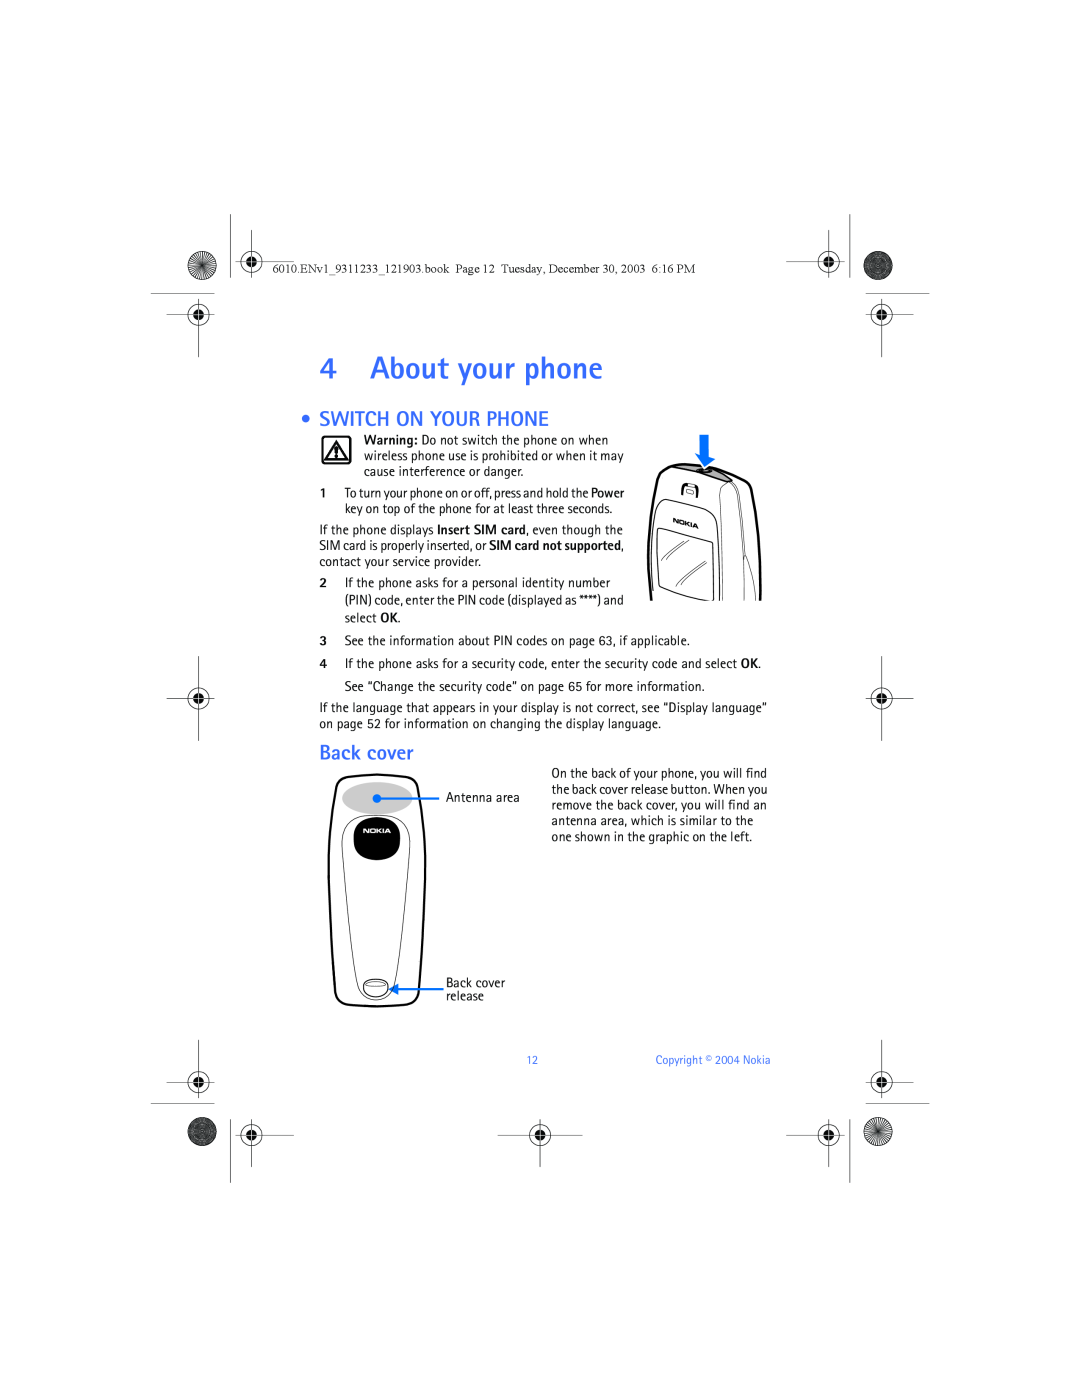 Nokia 6010 manual About your phone, Switch On Your Phone, Back cover 